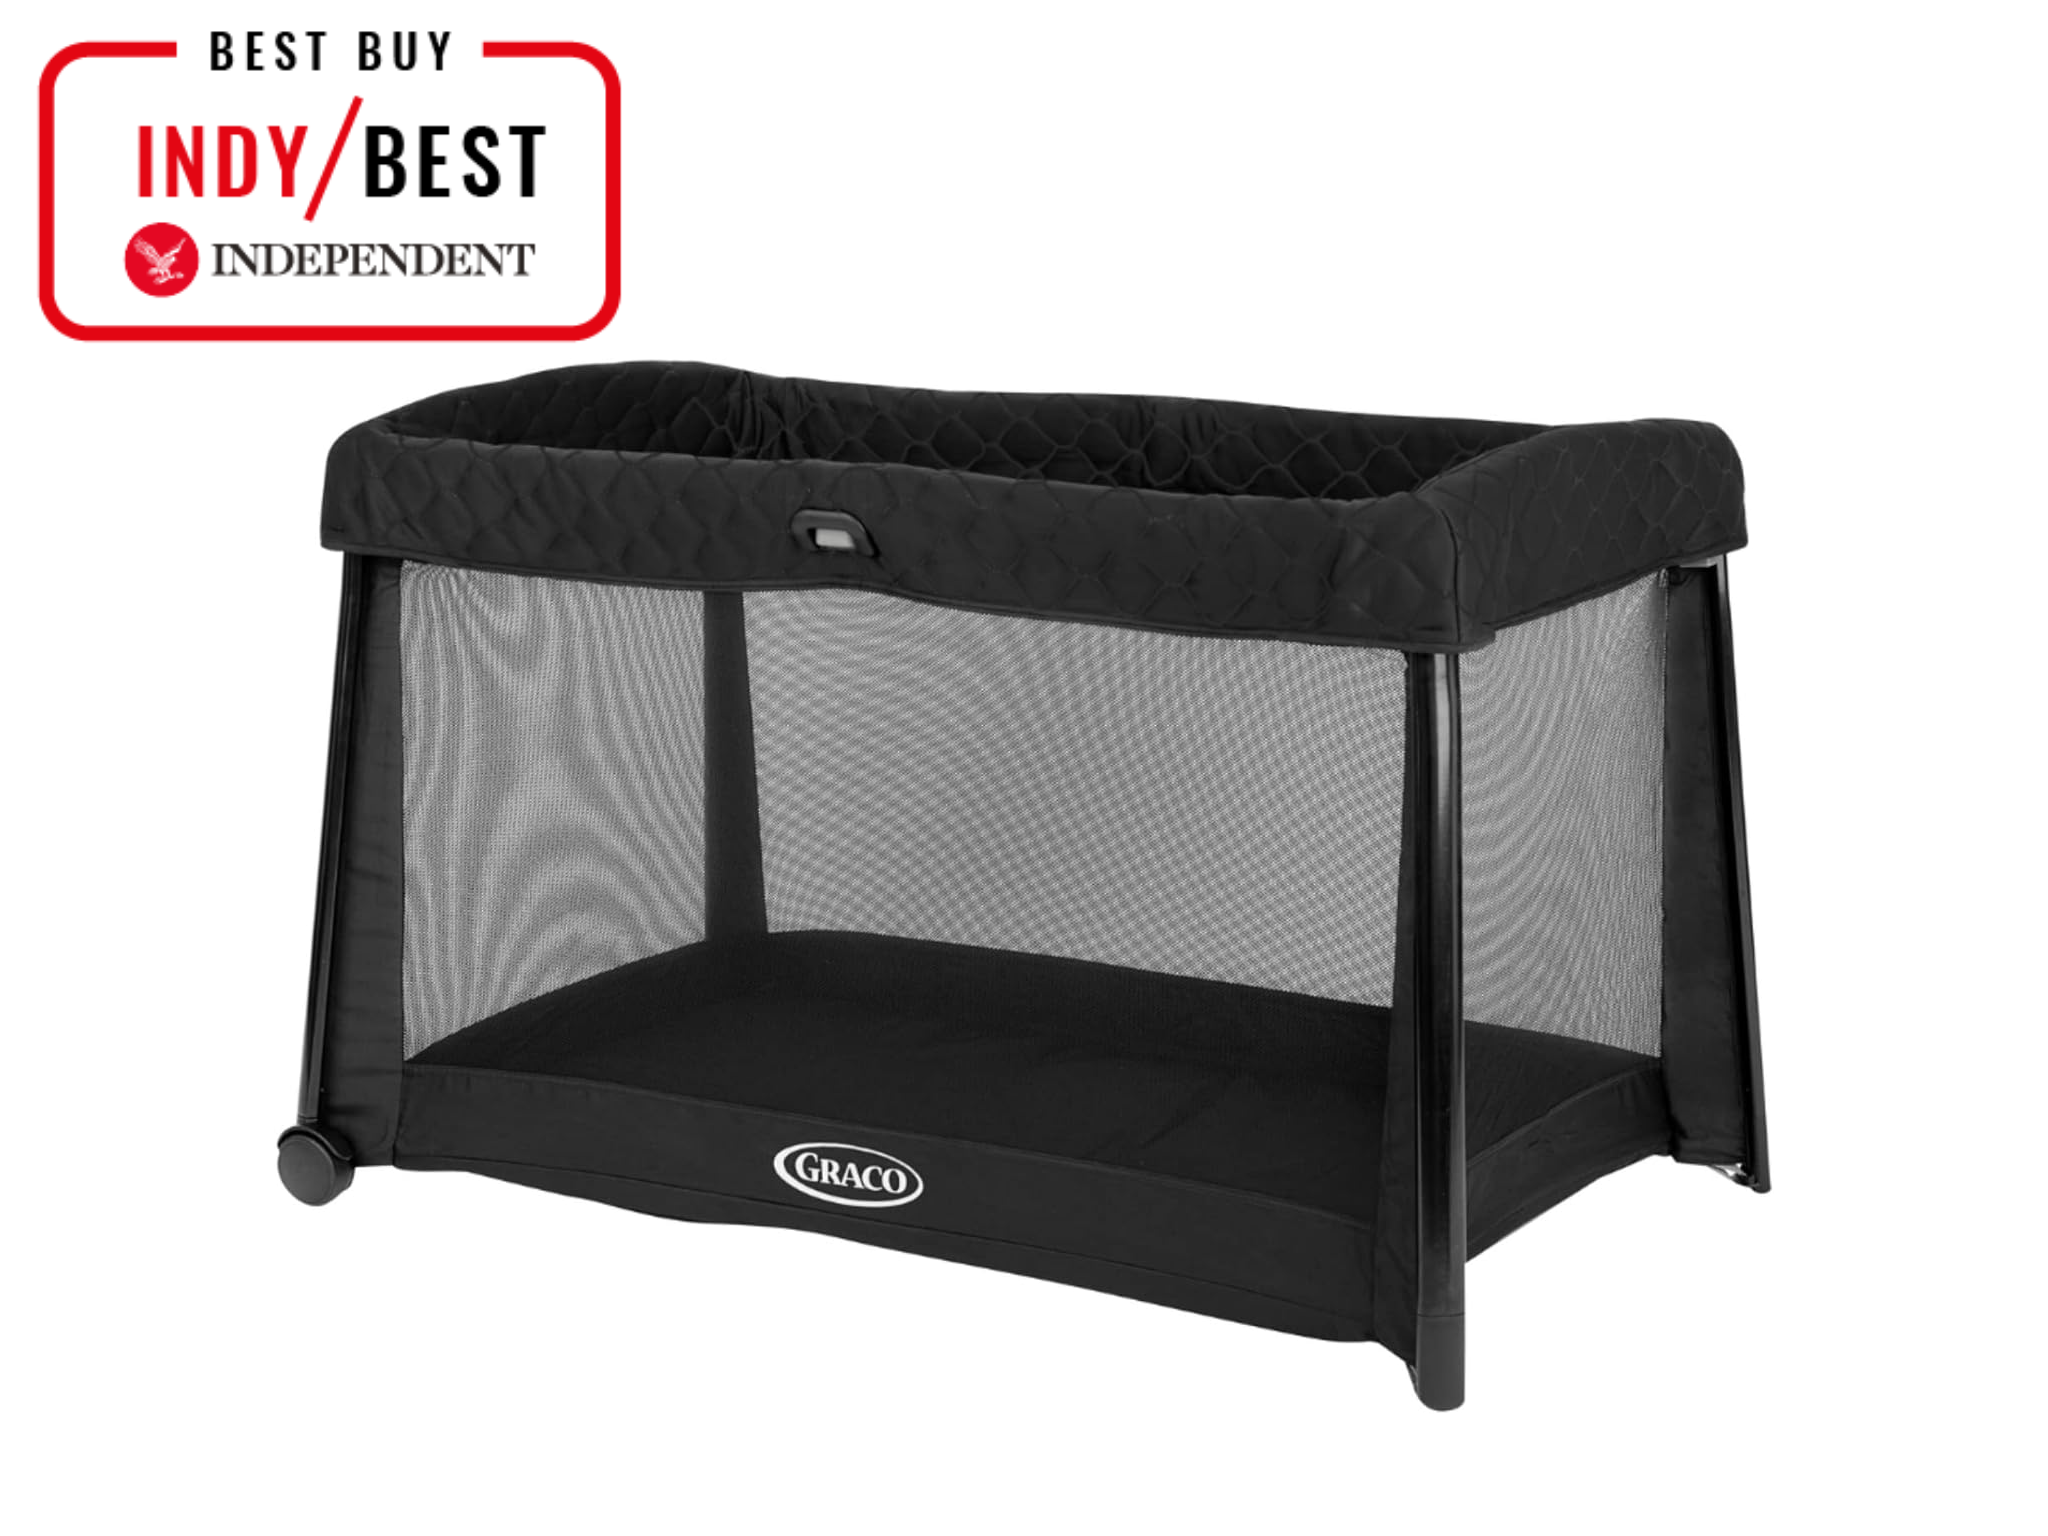 graco foldlite travel cot indybest (1).png